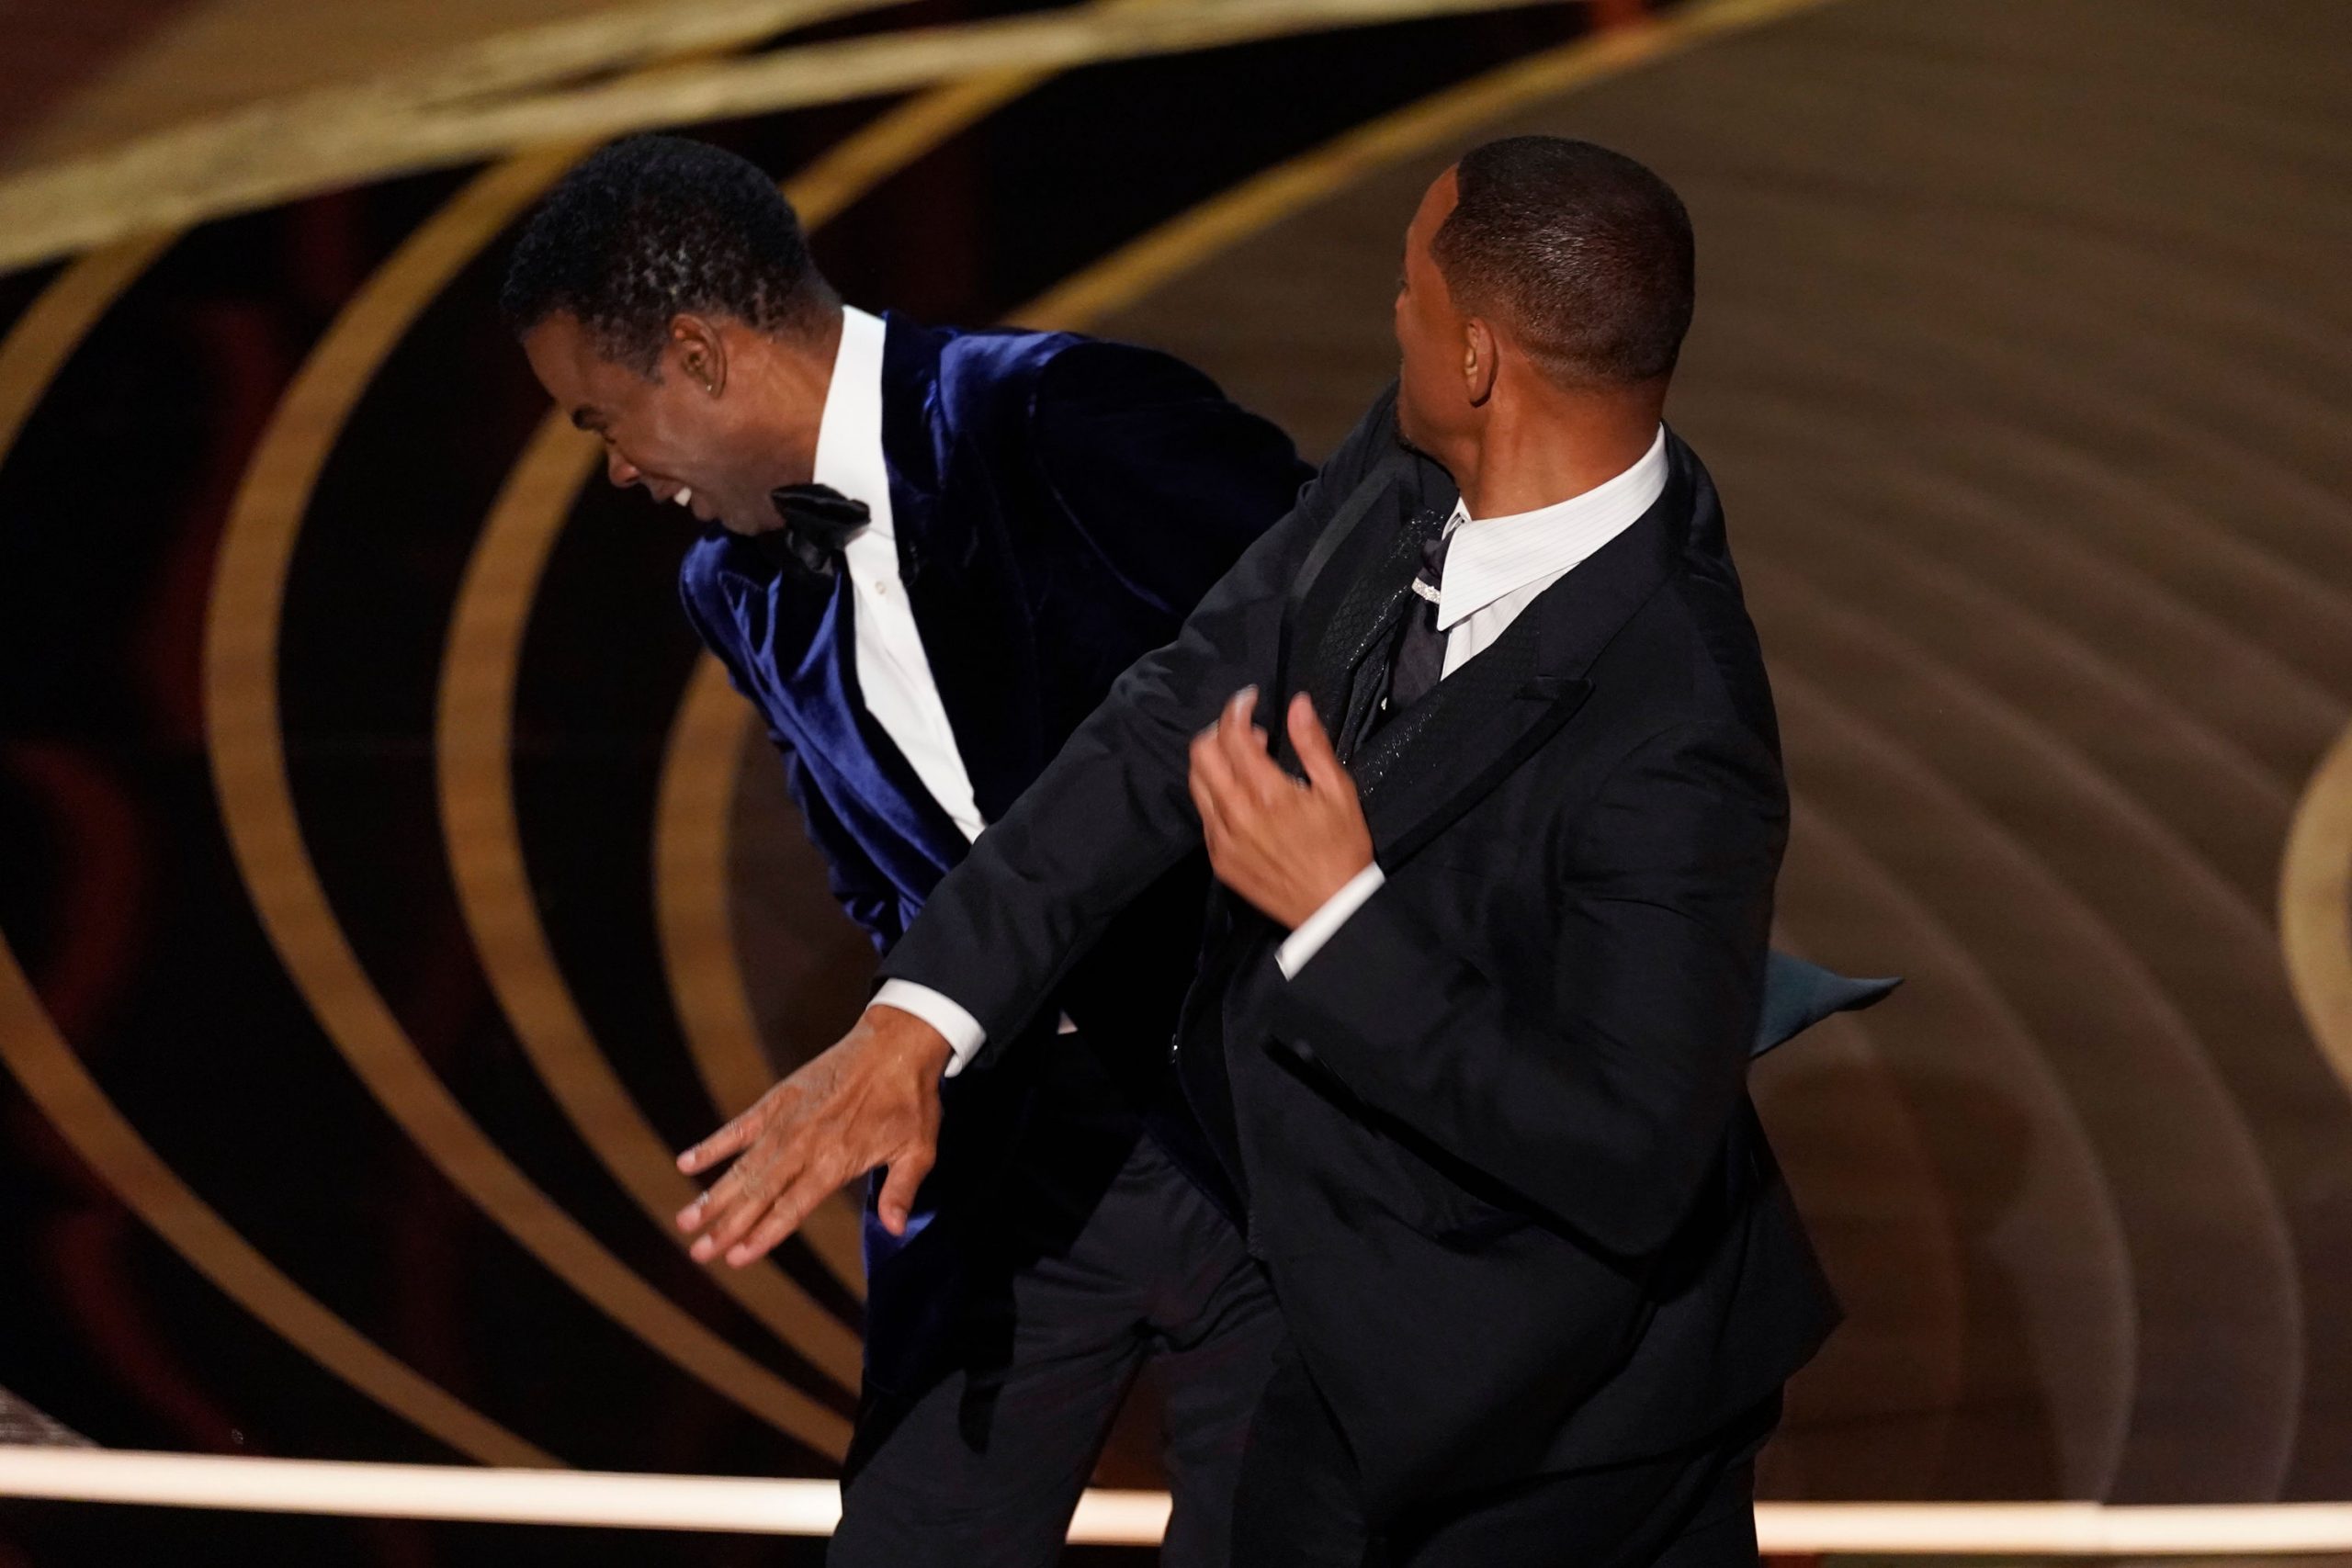 Can the real Will Smith please stand up? Gaming exec faces Oscar slap brunt